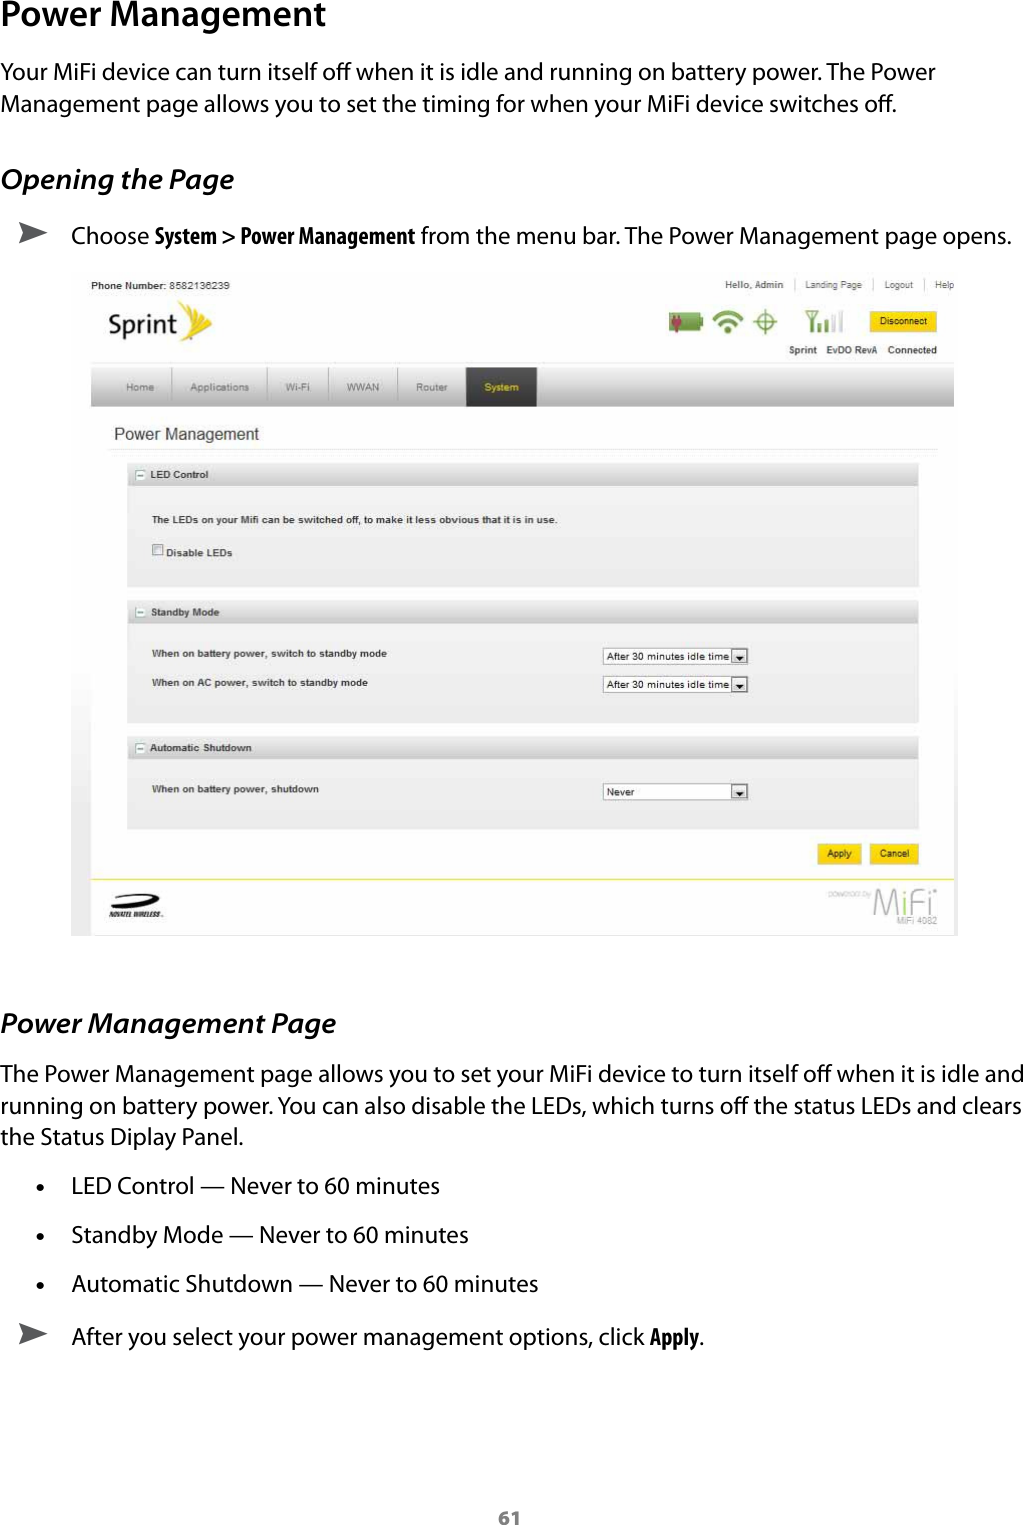 61Power ManagementYour MiFi device can turn itself o when it is idle and running on battery power. The Power Management page allows you to set the timing for when your MiFi device switches o.Opening the Page ➤ Choose System &gt; Power Management from the menu bar. The Power Management page opens.Power Management PageThe Power Management page allows you to set your MiFi device to turn itself o when it is idle and running on battery power. You can also disable the LEDs, which turns o the status LEDs and clears the Status Diplay Panel. •LED Control — Never to 60 minutes •Standby Mode — Never to 60 minutes •Automatic Shutdown — Never to 60 minutes ➤ After you select your power management options, click Apply.